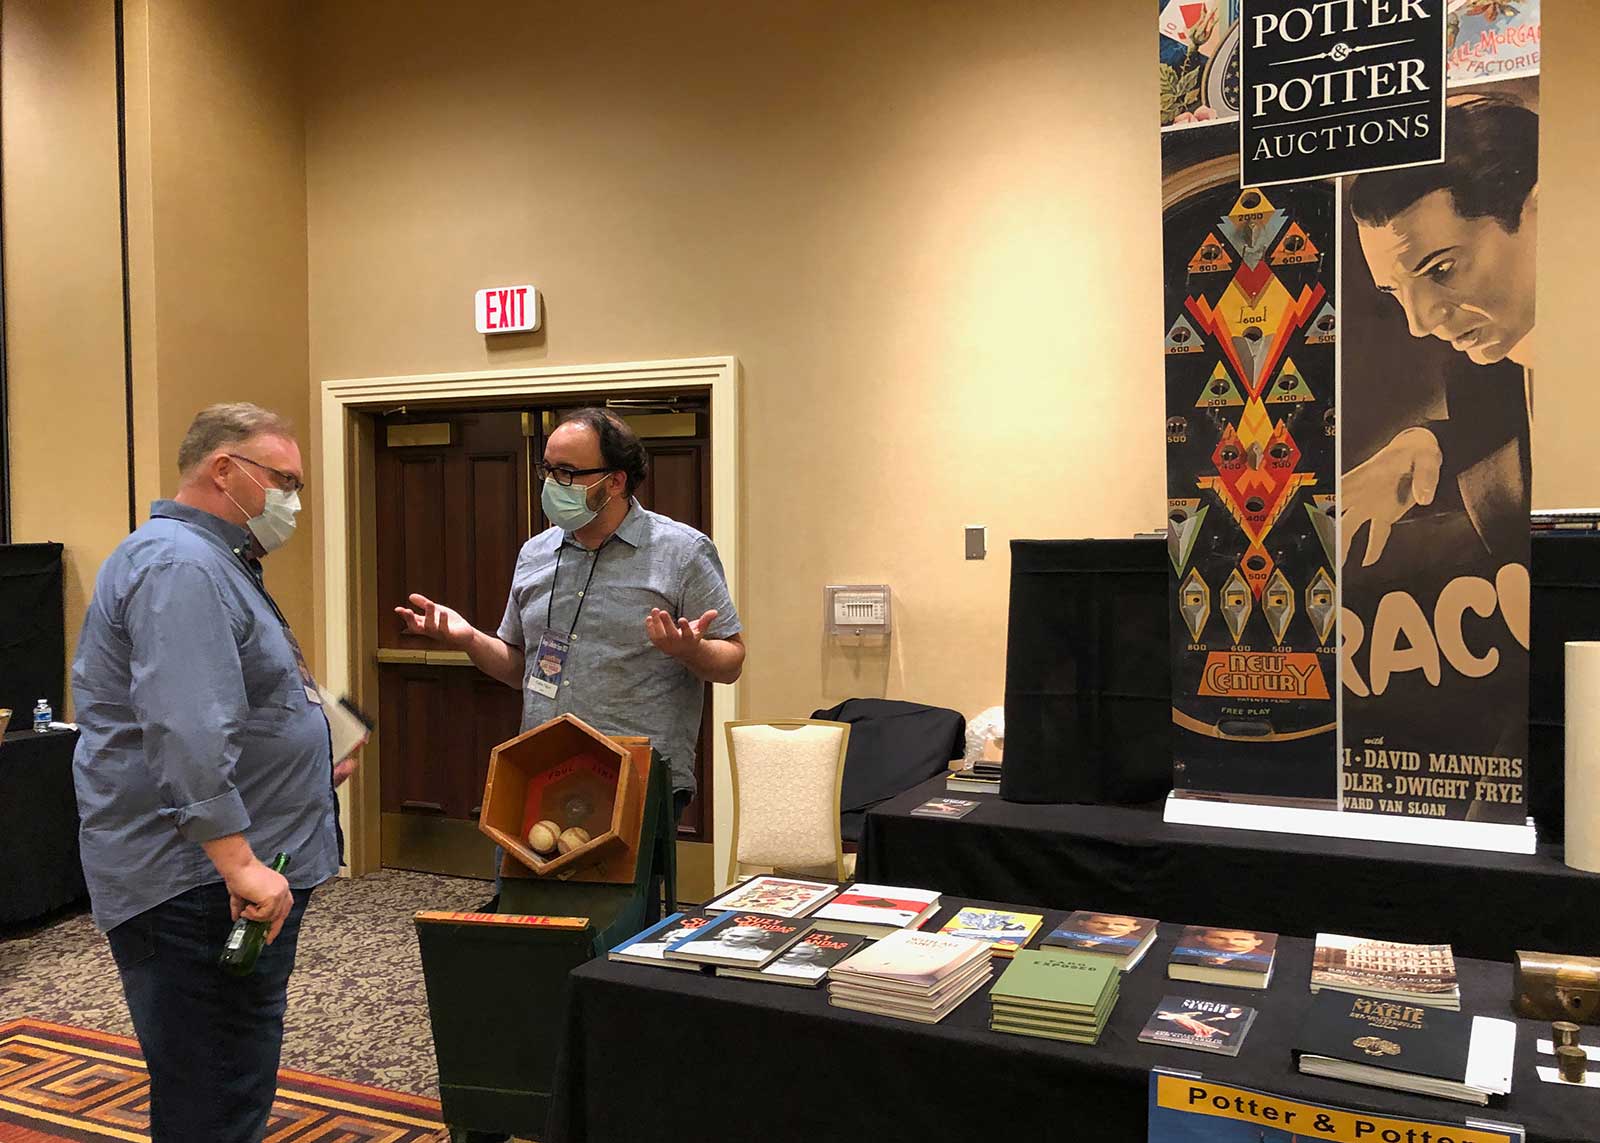 Potter and Potter Auctions Booth at the Magic Collectors Expo 2021